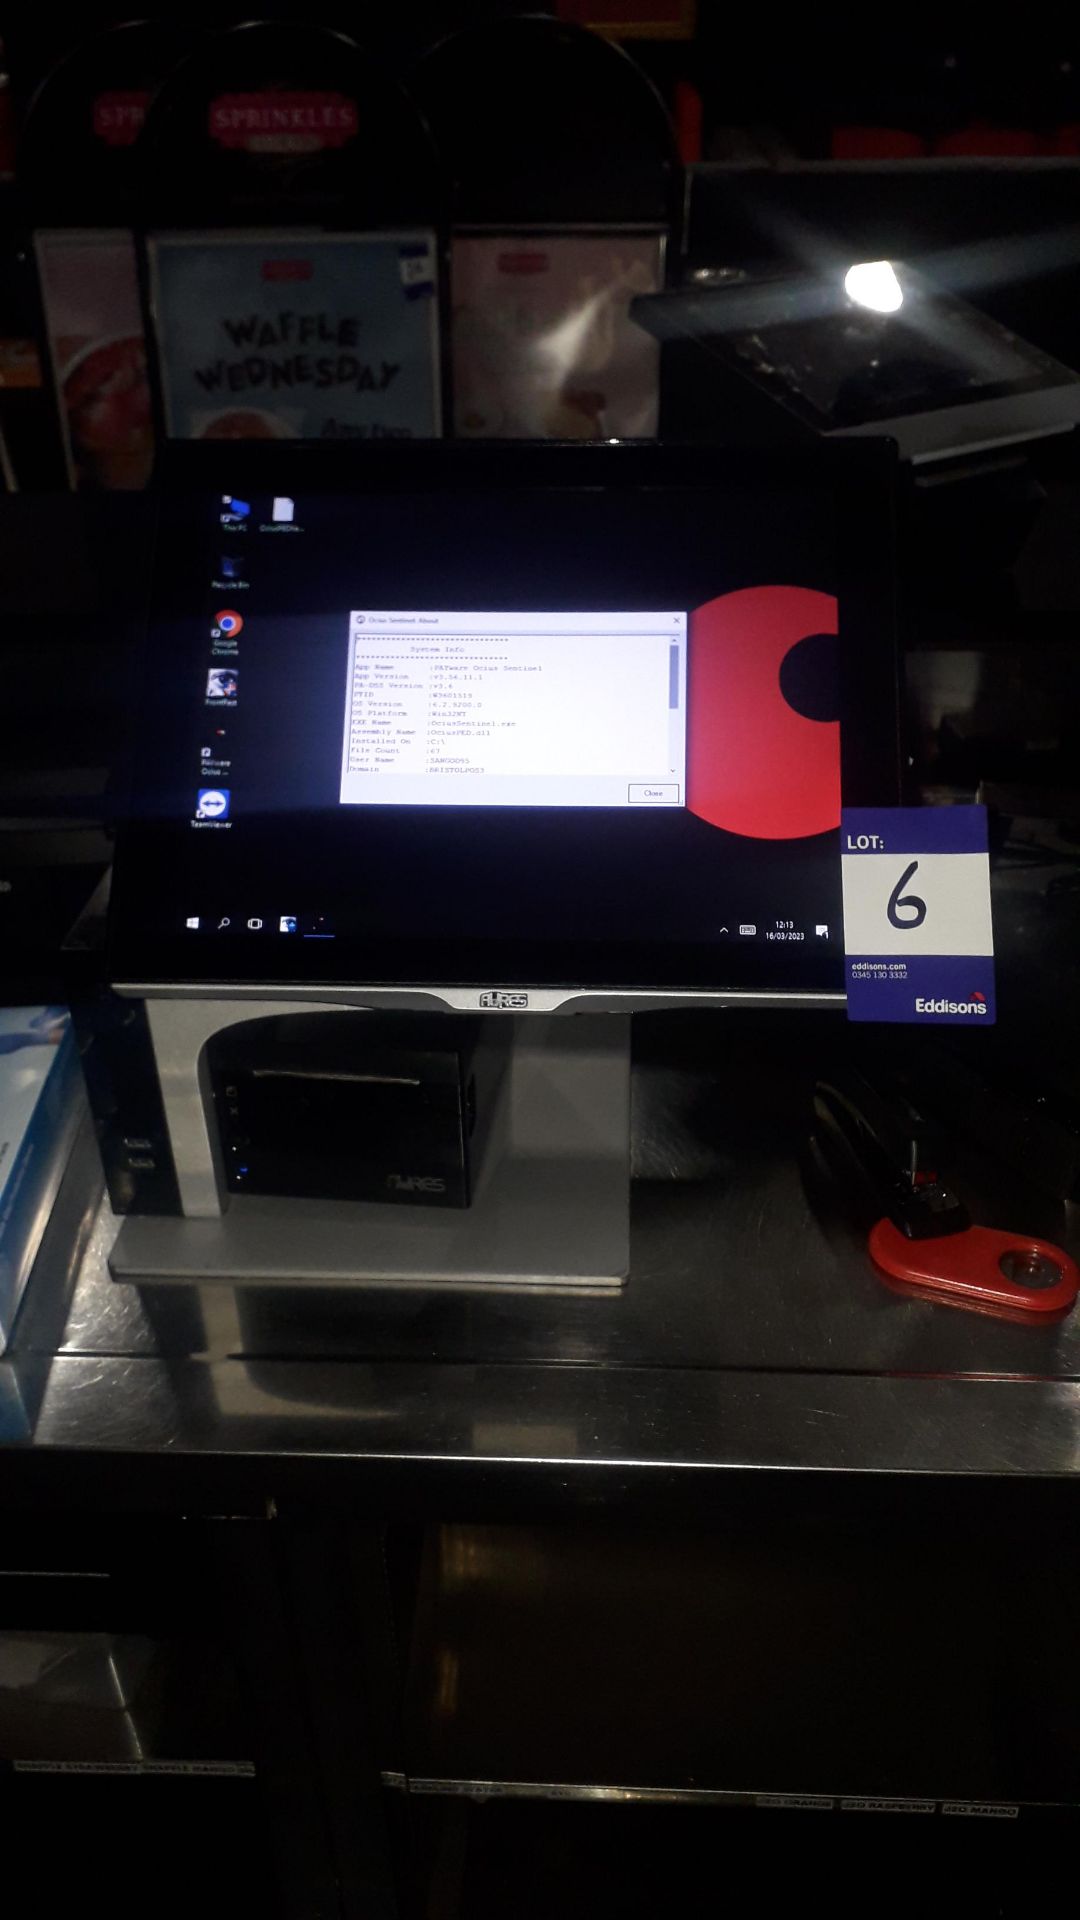 Aures Epos System with Aures double sided touch screen, Aures ODP333 receipt printer, Serial